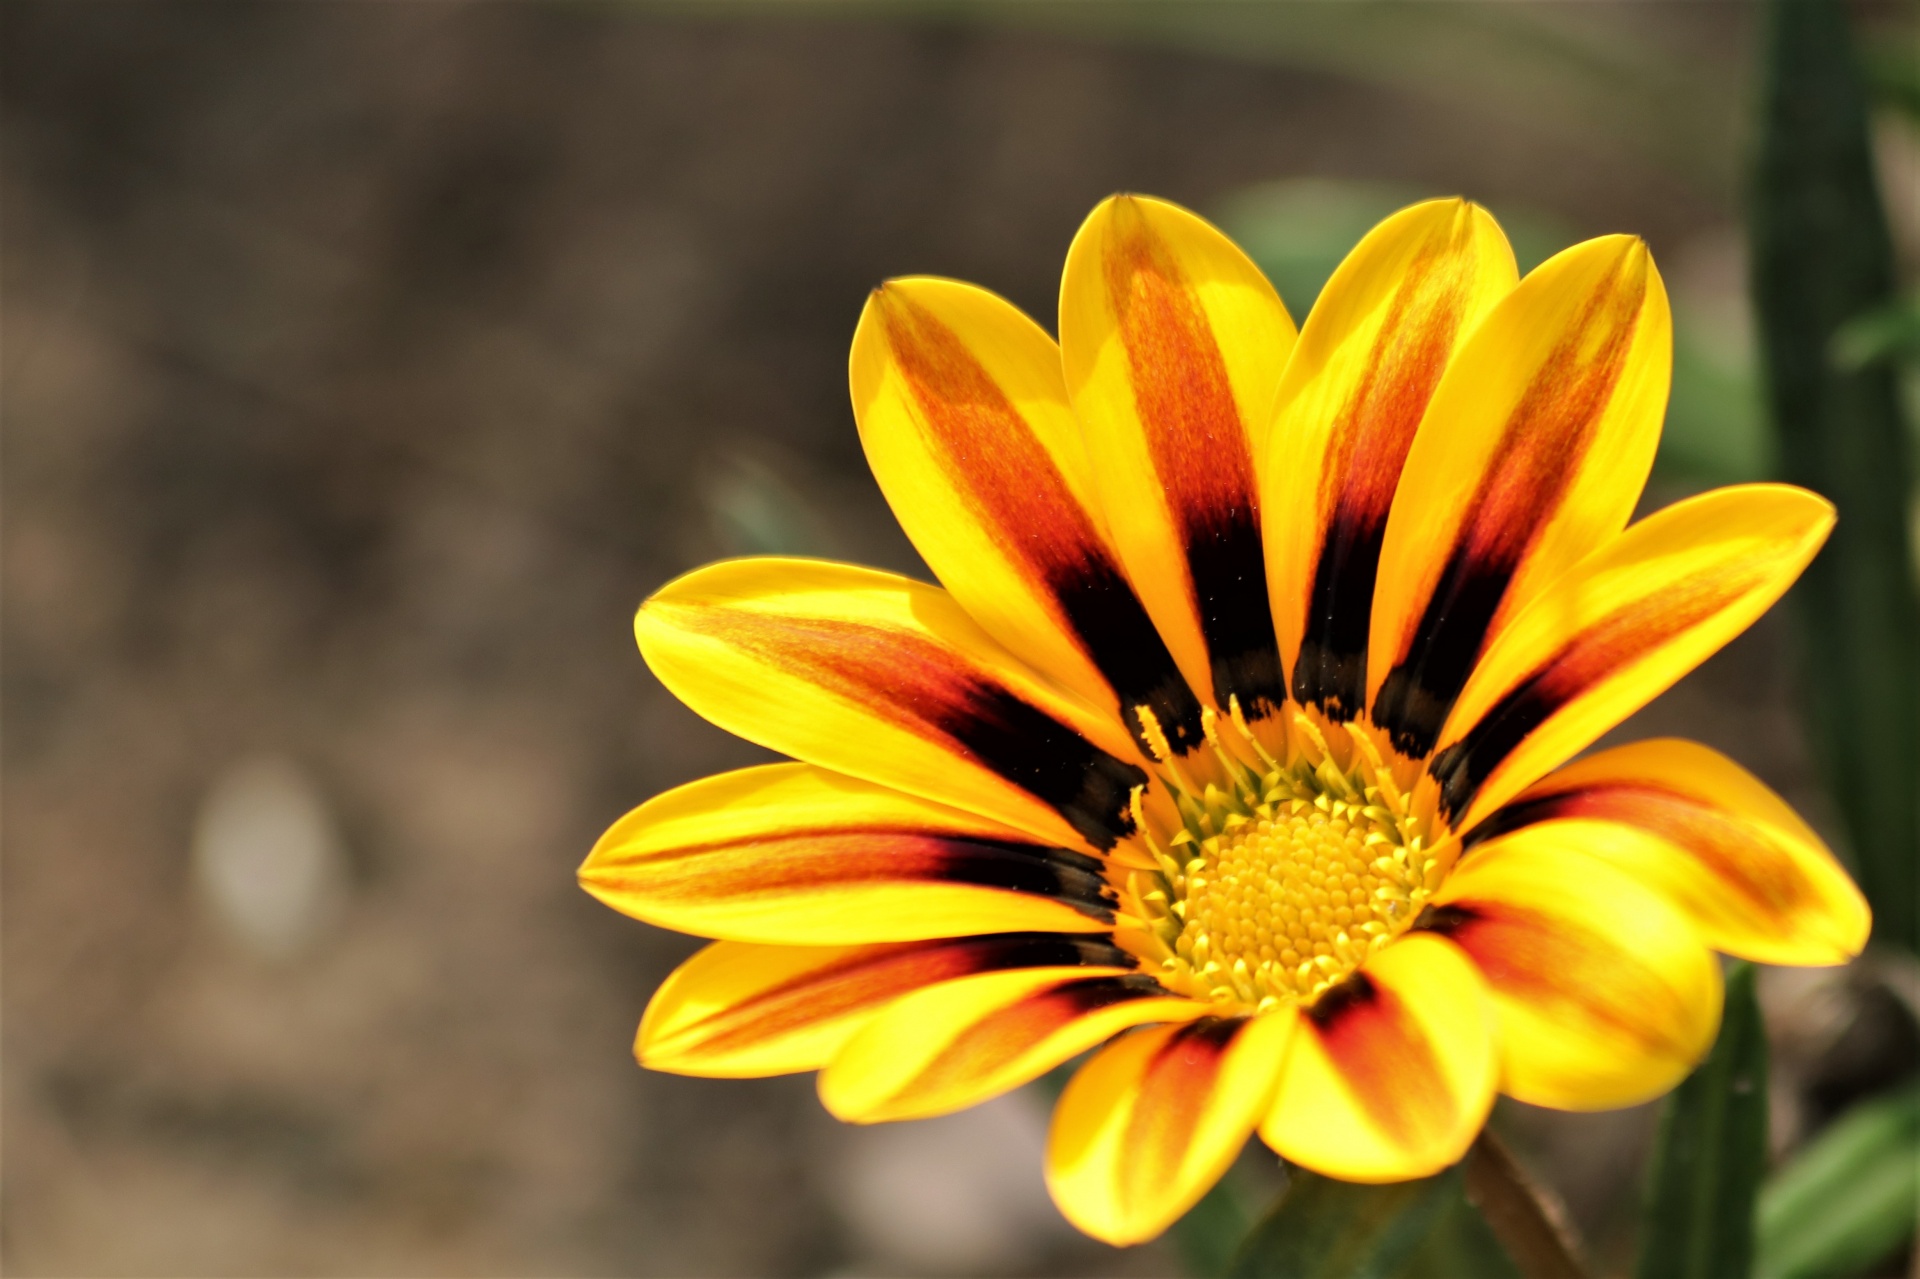 Close-up of a yellow gazania flower, with black and red stripes.